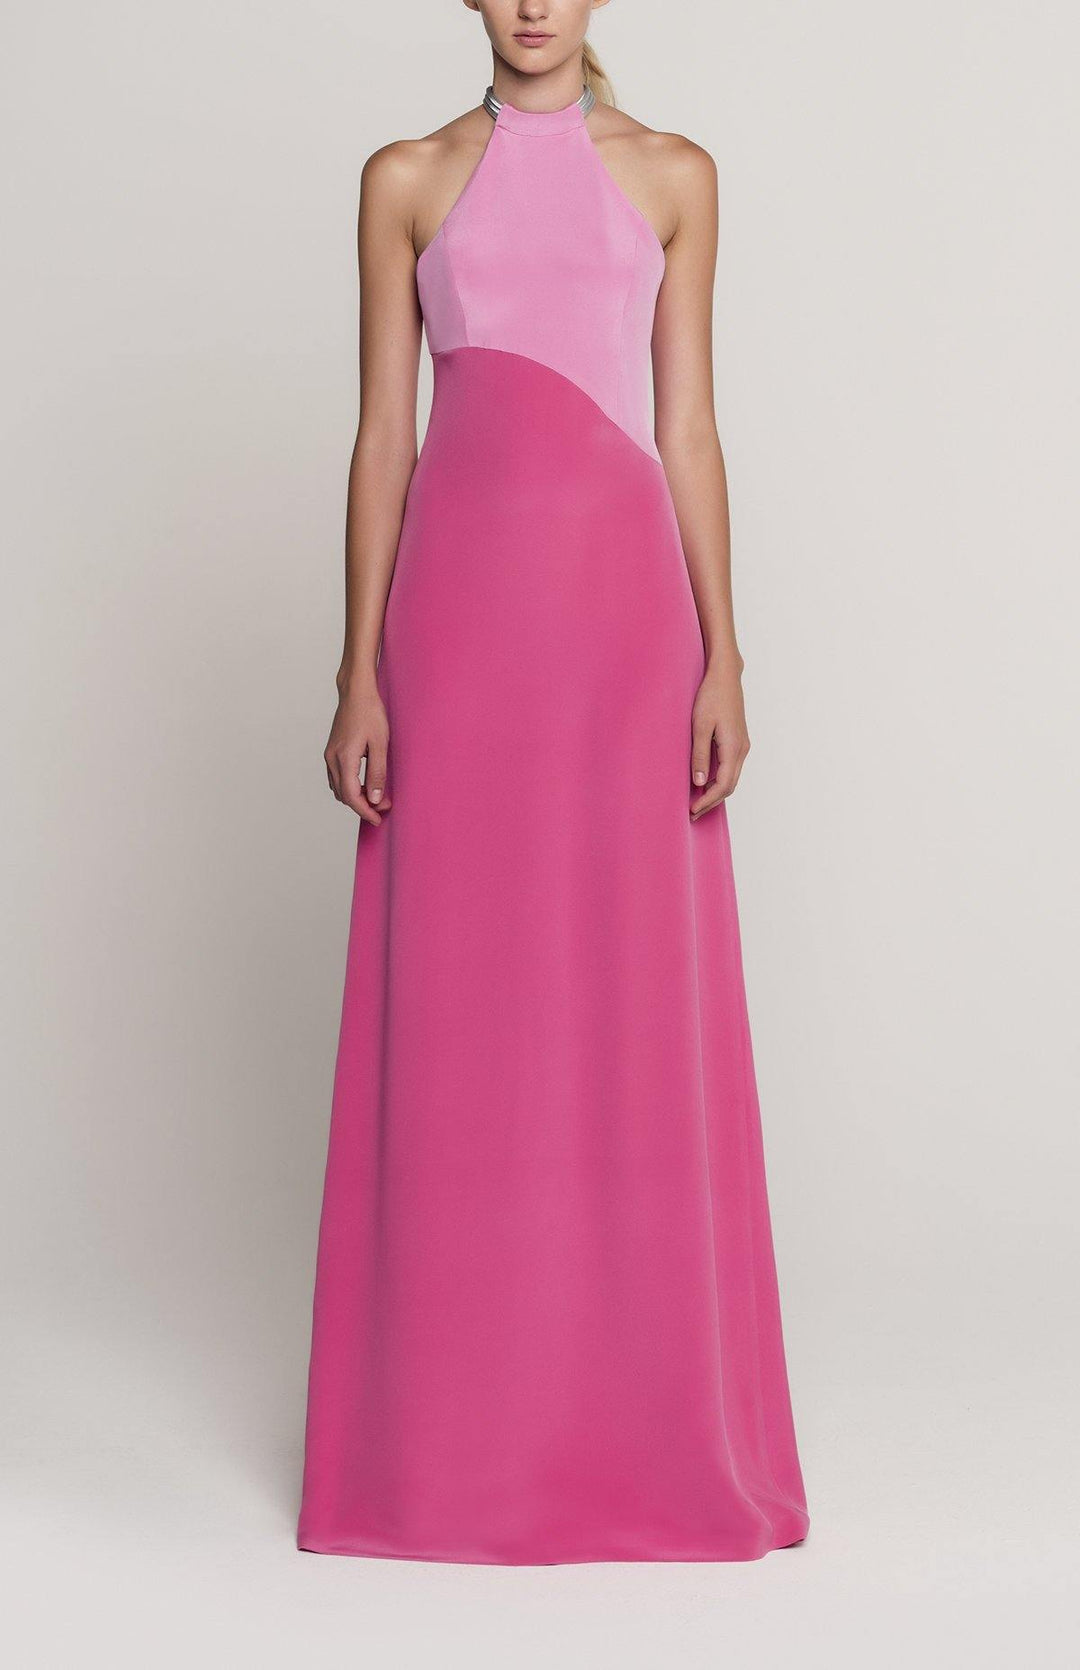 Pale pink and fuschia long, sleeveless, colorblock dress in double silk crepe with a futuristic silver neck trim detail.